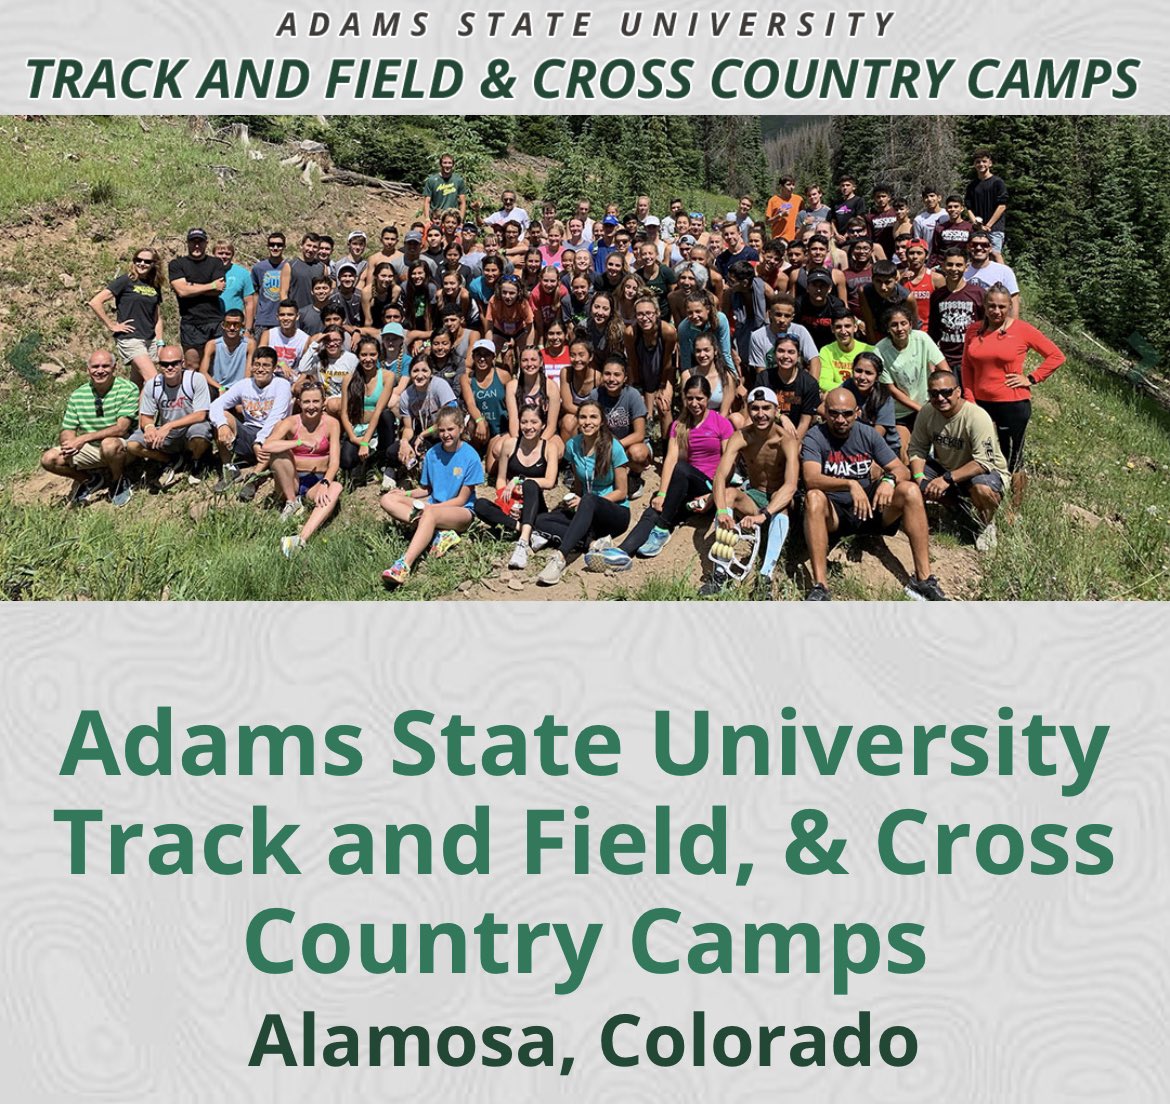 Join us this summer for our high altitude distance camp! 🏃🏻‍♀️🏃🏻 July 31st - August 5th Ages: Junior High - High School Registration Link in bio!